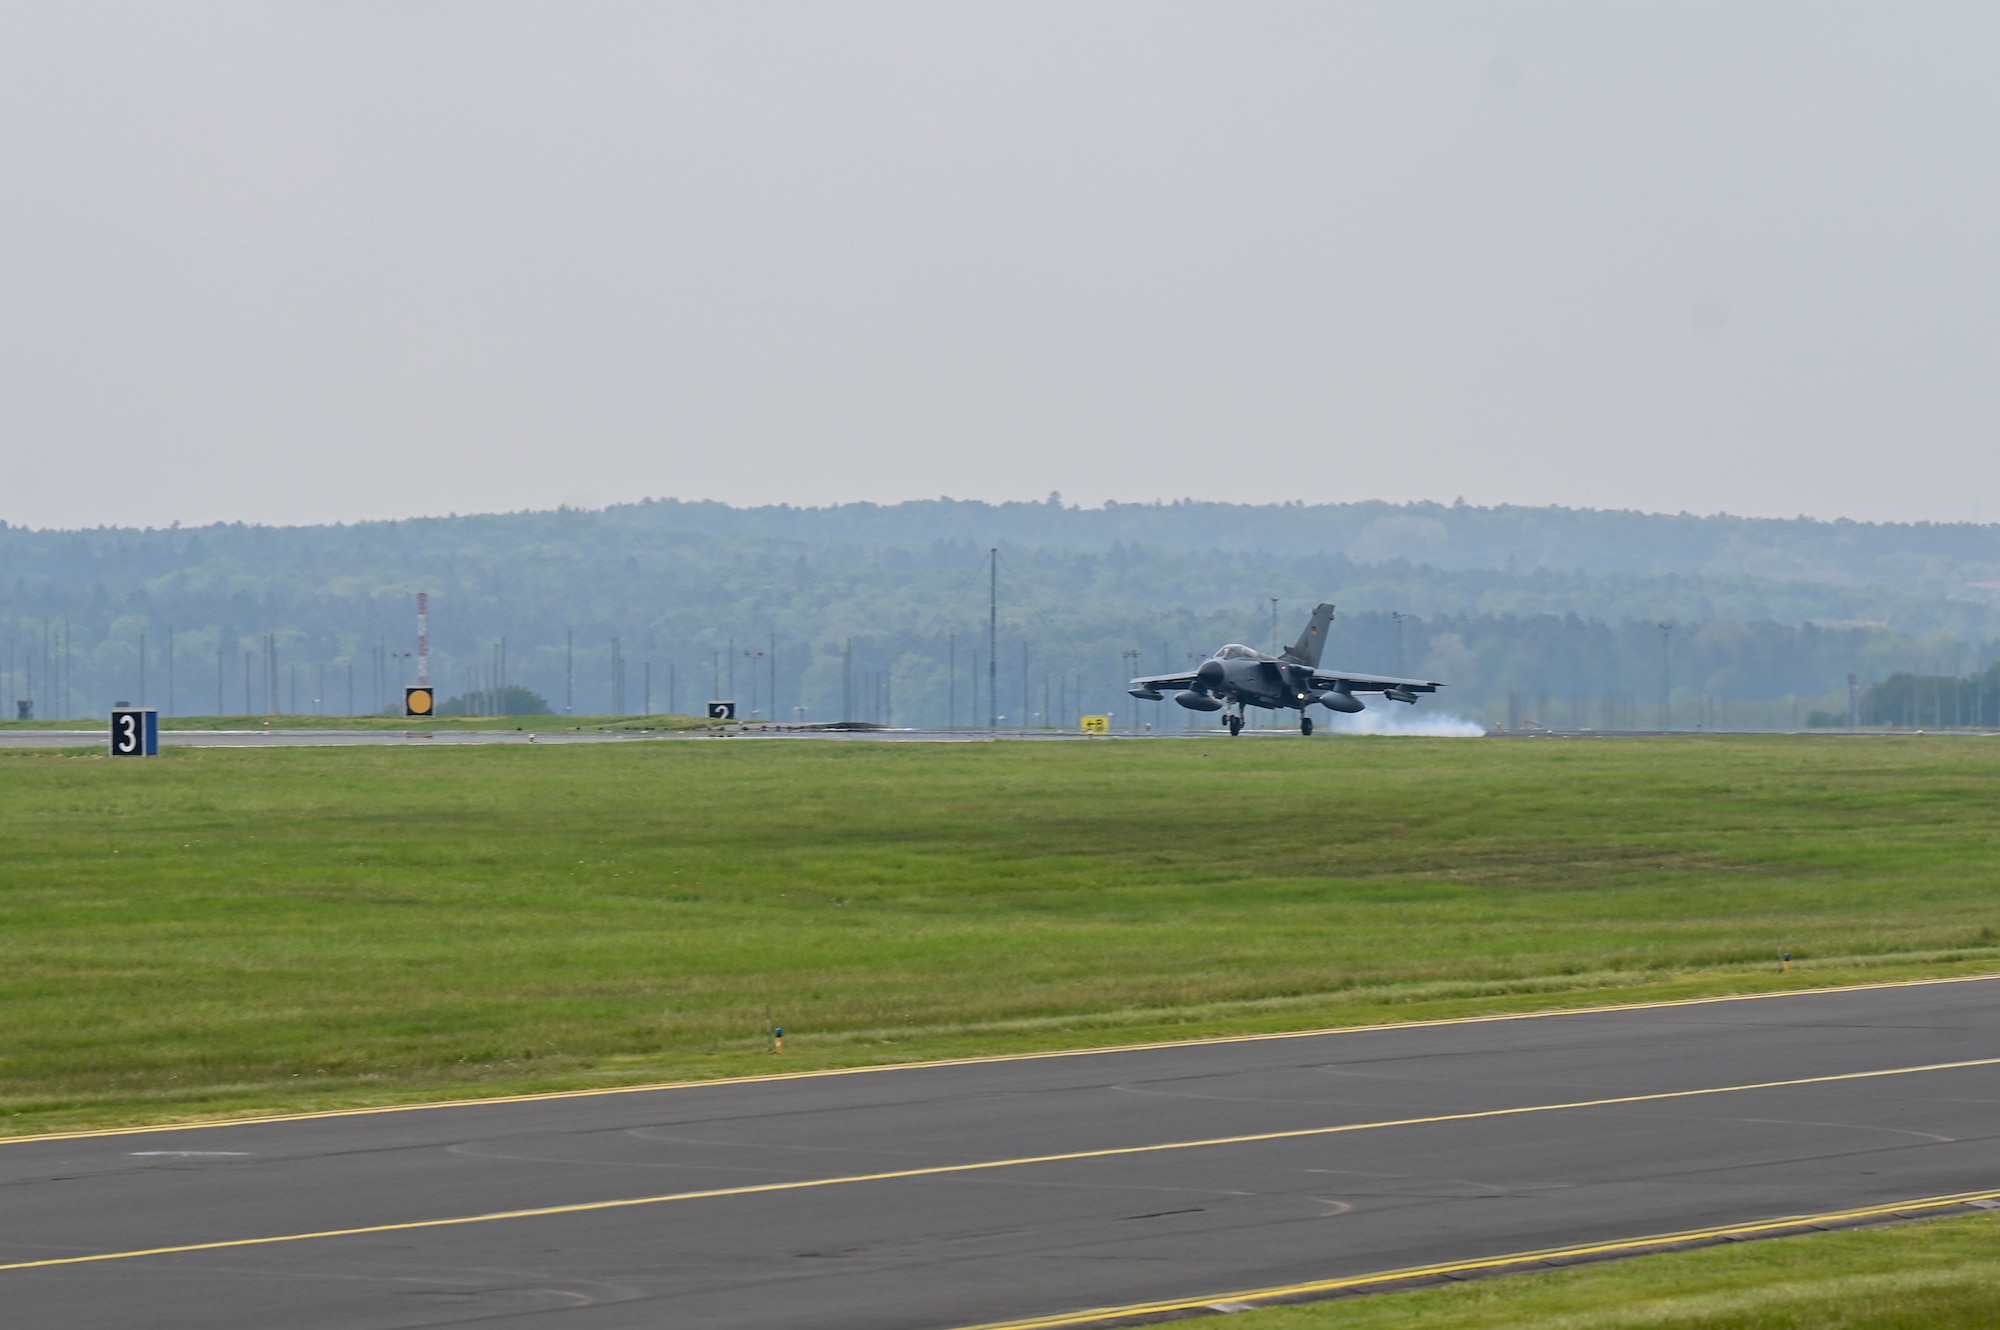 A German Air Force PA-200 Tornado aircraft assigned to Tactical Air Wing 33, Büchel Air Base, Germany, lands at Spangdahlem AB, Germany, May 15, 2023. For approximately three weeks, the aircraft will conduct training and interoperability missions from Spangdahlem AB. (U.S. Air Force photo by Senior Airman Jessica Sanchez-Chen)